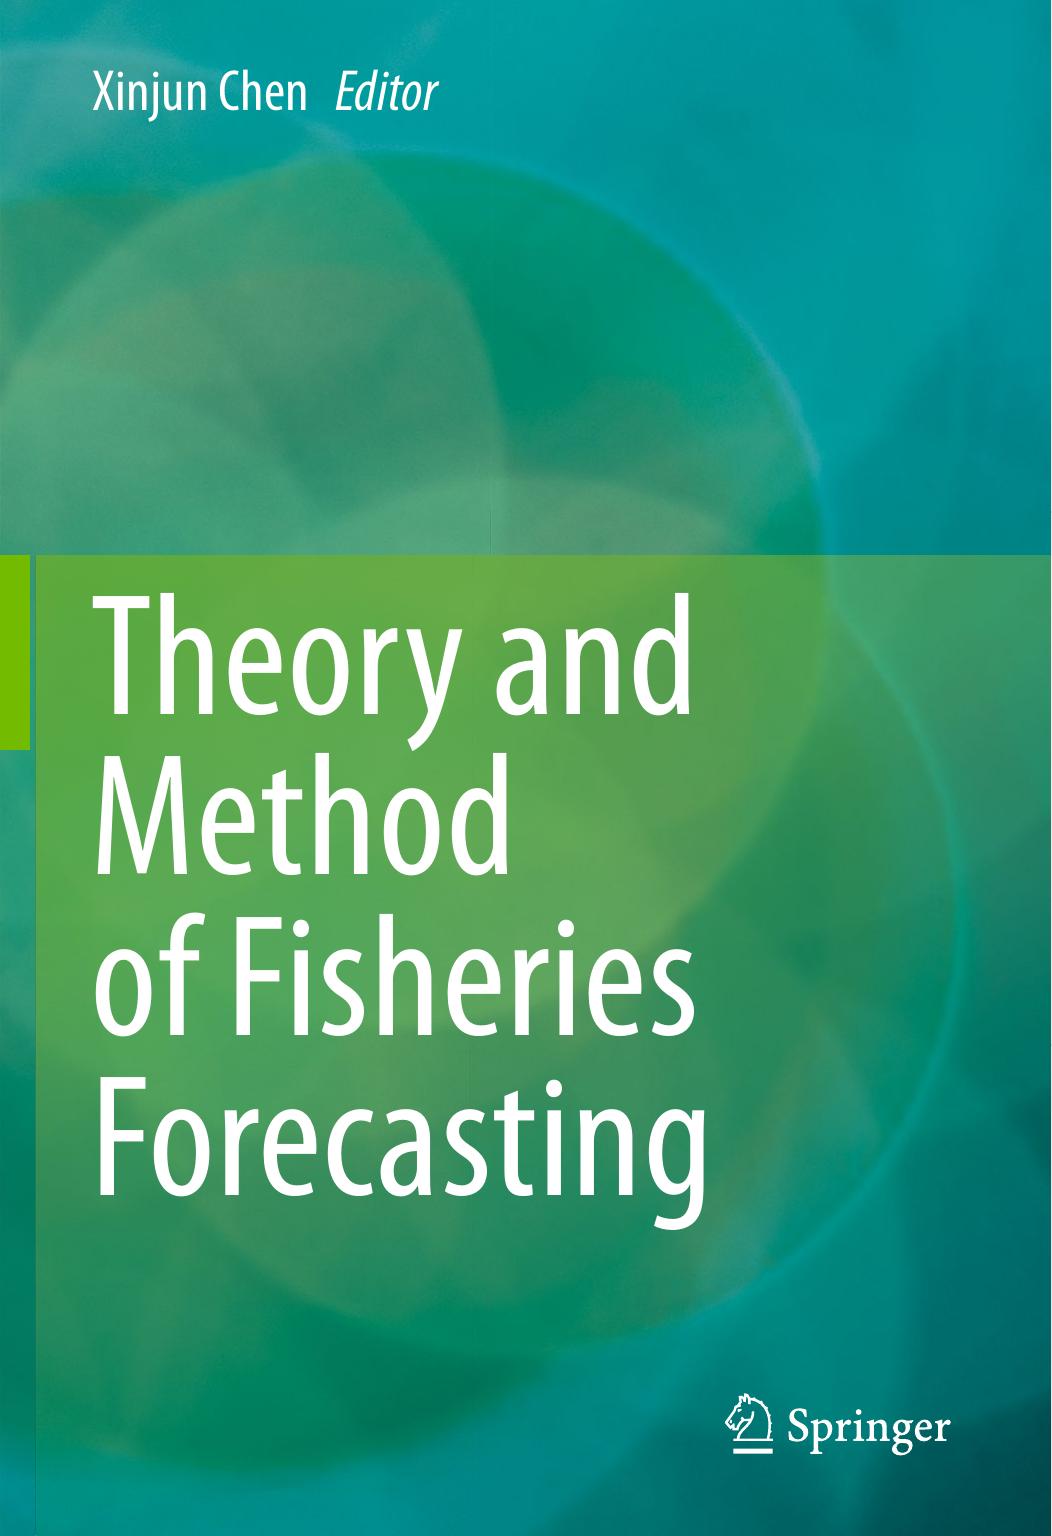 Theory and Method of Fisheries Forecasting-Springer (2022)